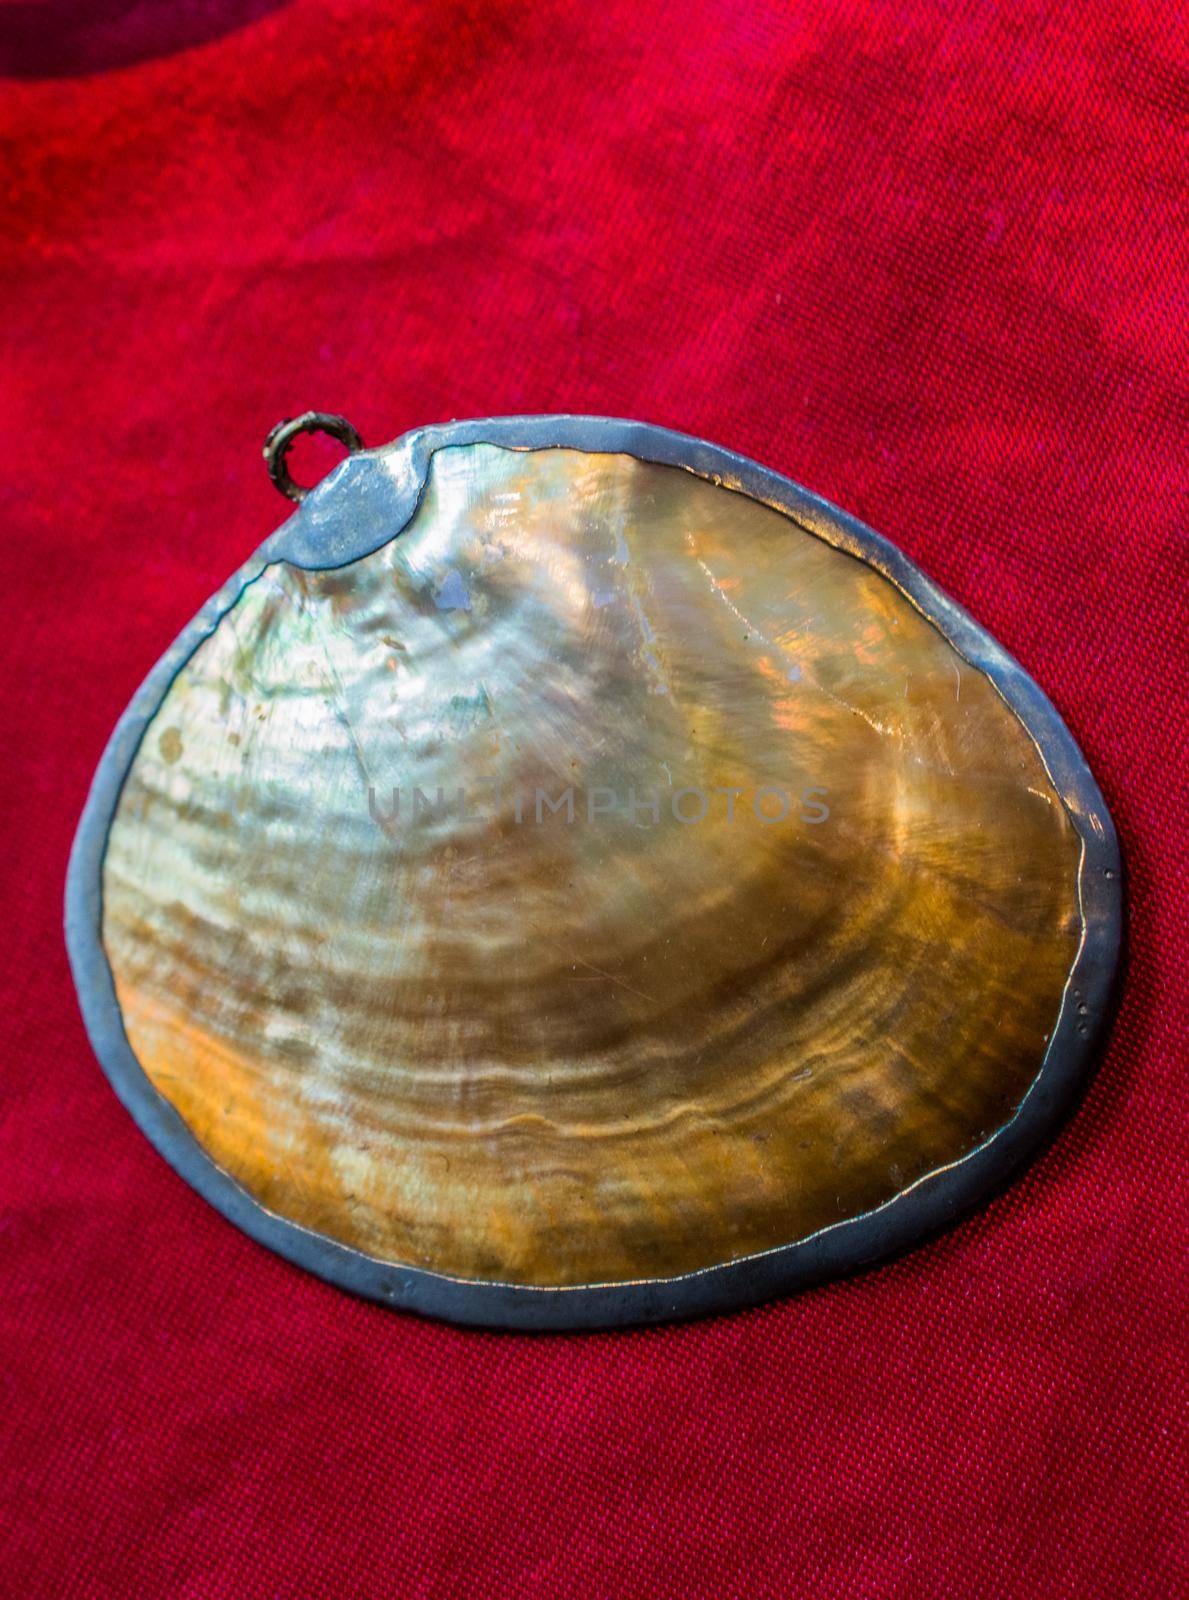 the pearl shell as a sea shell object in view